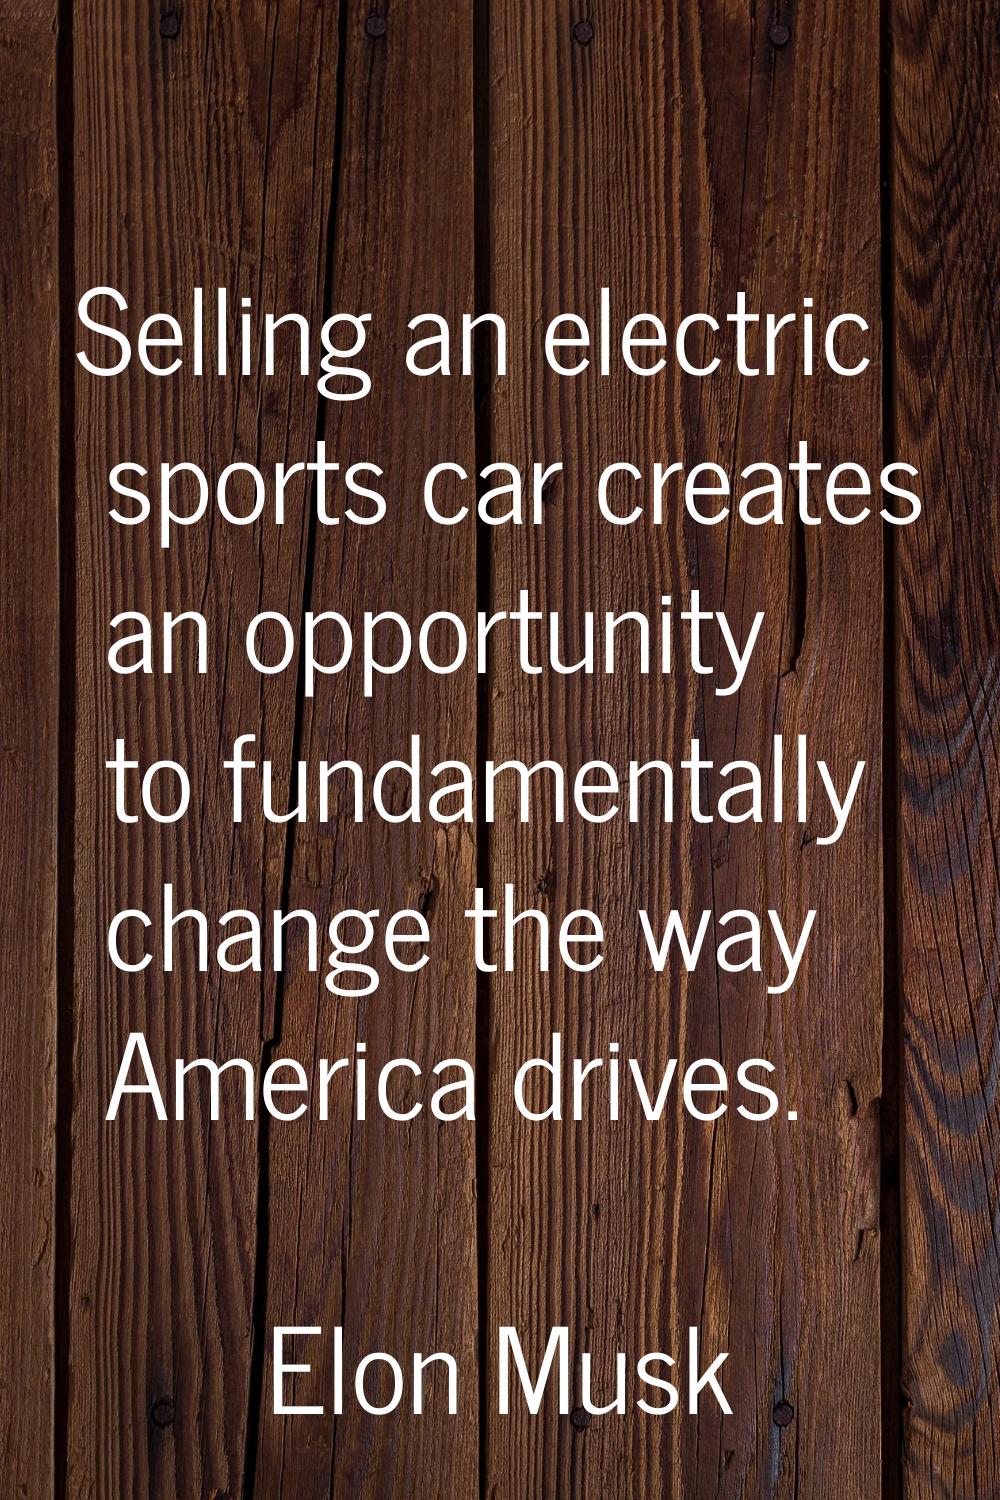 Selling an electric sports car creates an opportunity to fundamentally change the way America drive